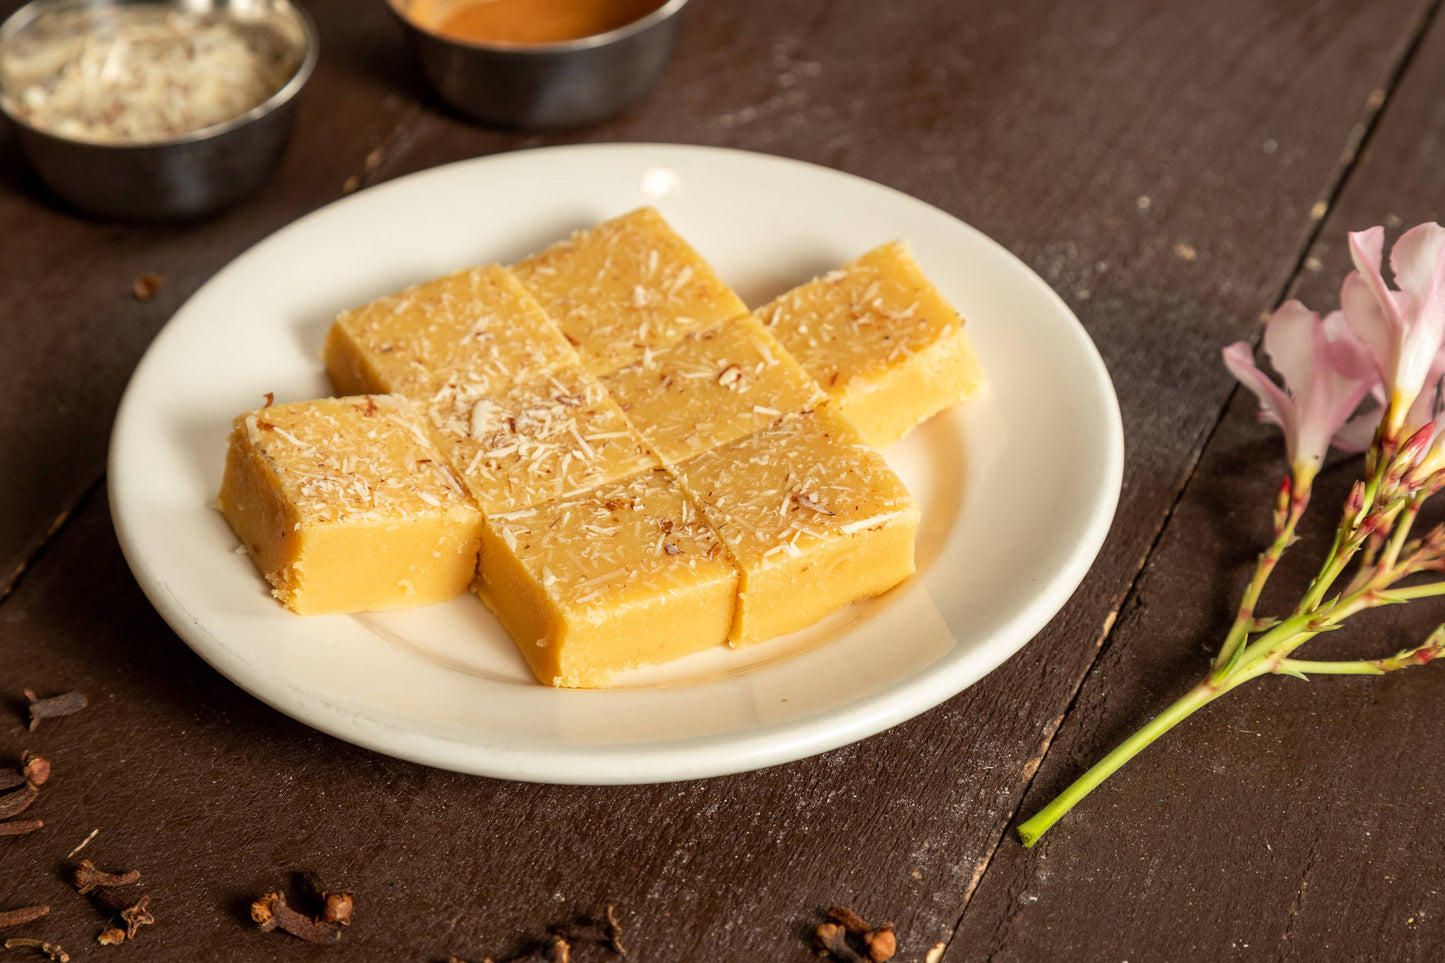 Ganesha Sweets Almond Barfee is made with whole milk, pure cane C&H Sugar, Ghee and California Almonds. Great for every occassion. #Sharethemithai 